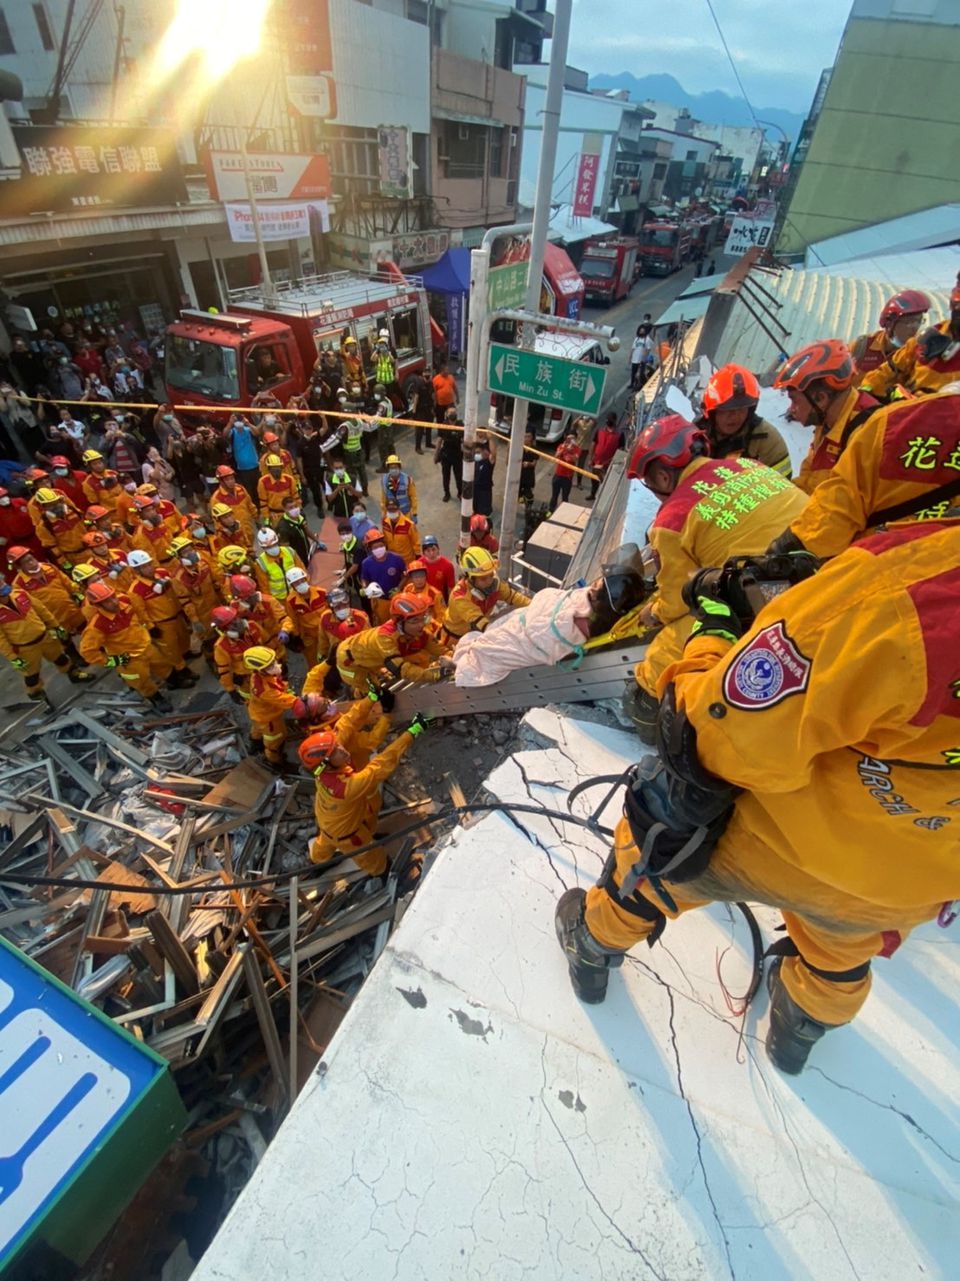 Firefighters rescue a person at the site where a building collapsed following a 6.8-magnitude earthquake, in Yuli, Hualien county, Taiwan September 18, 2022. Photo: Taiwan's 0918 Earthquake Central Emergency Operations Centre/Handout via REUTERS